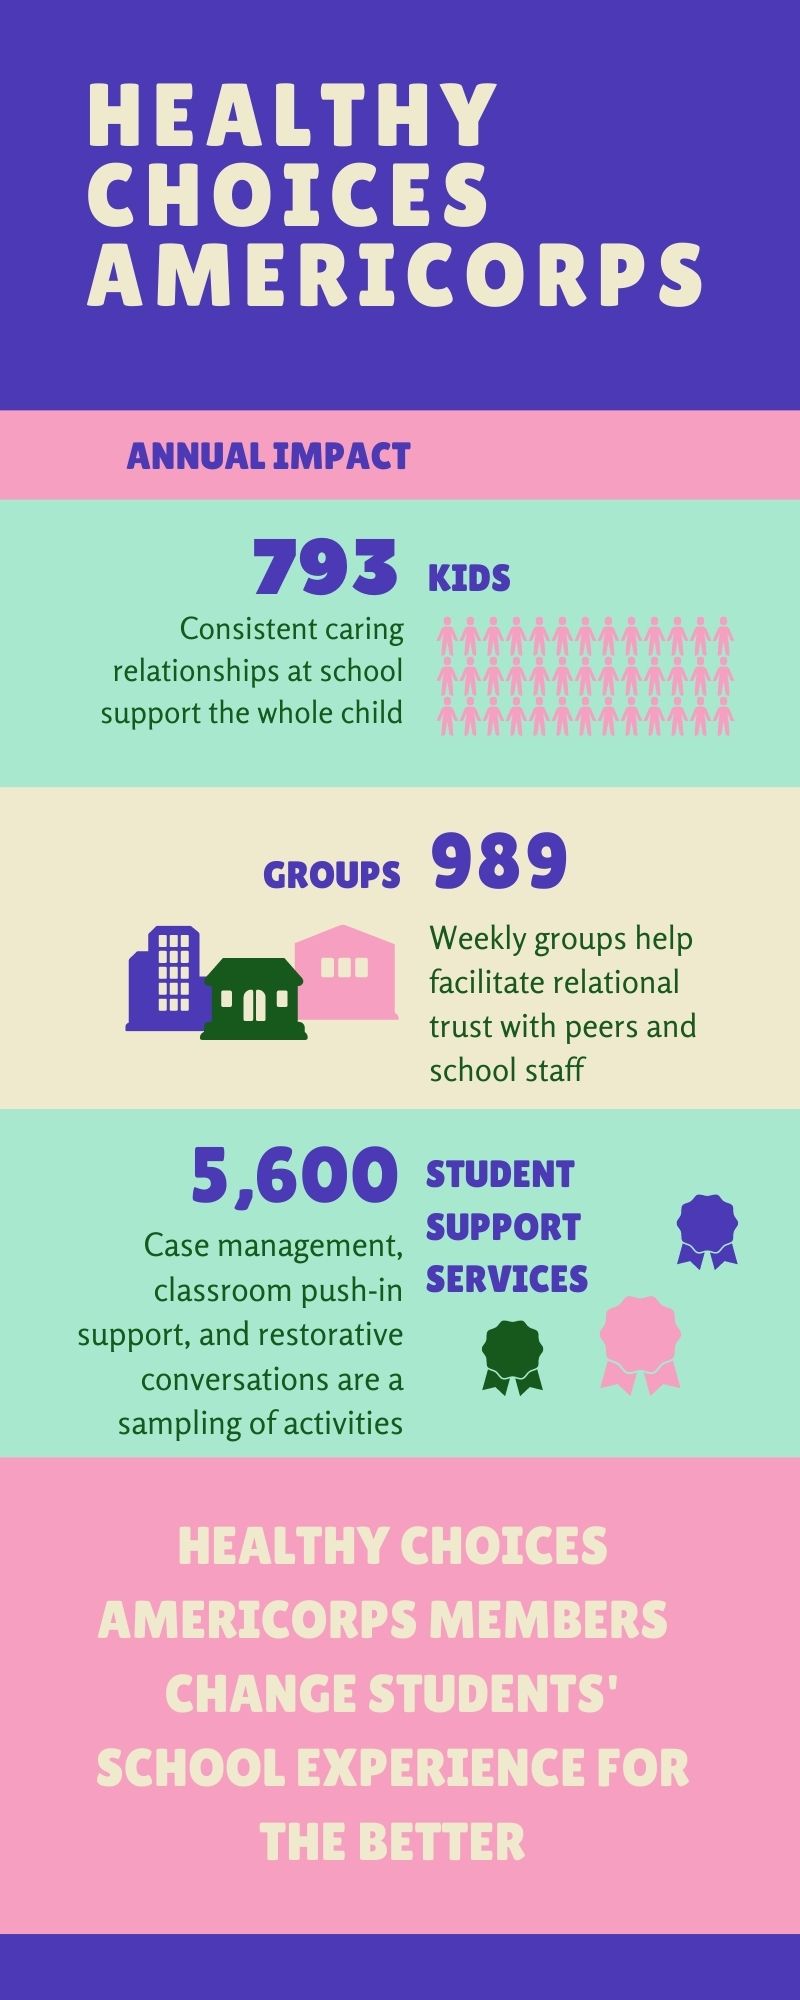 Members serve 793 kids in 989 groups and a total of 5600 student support services